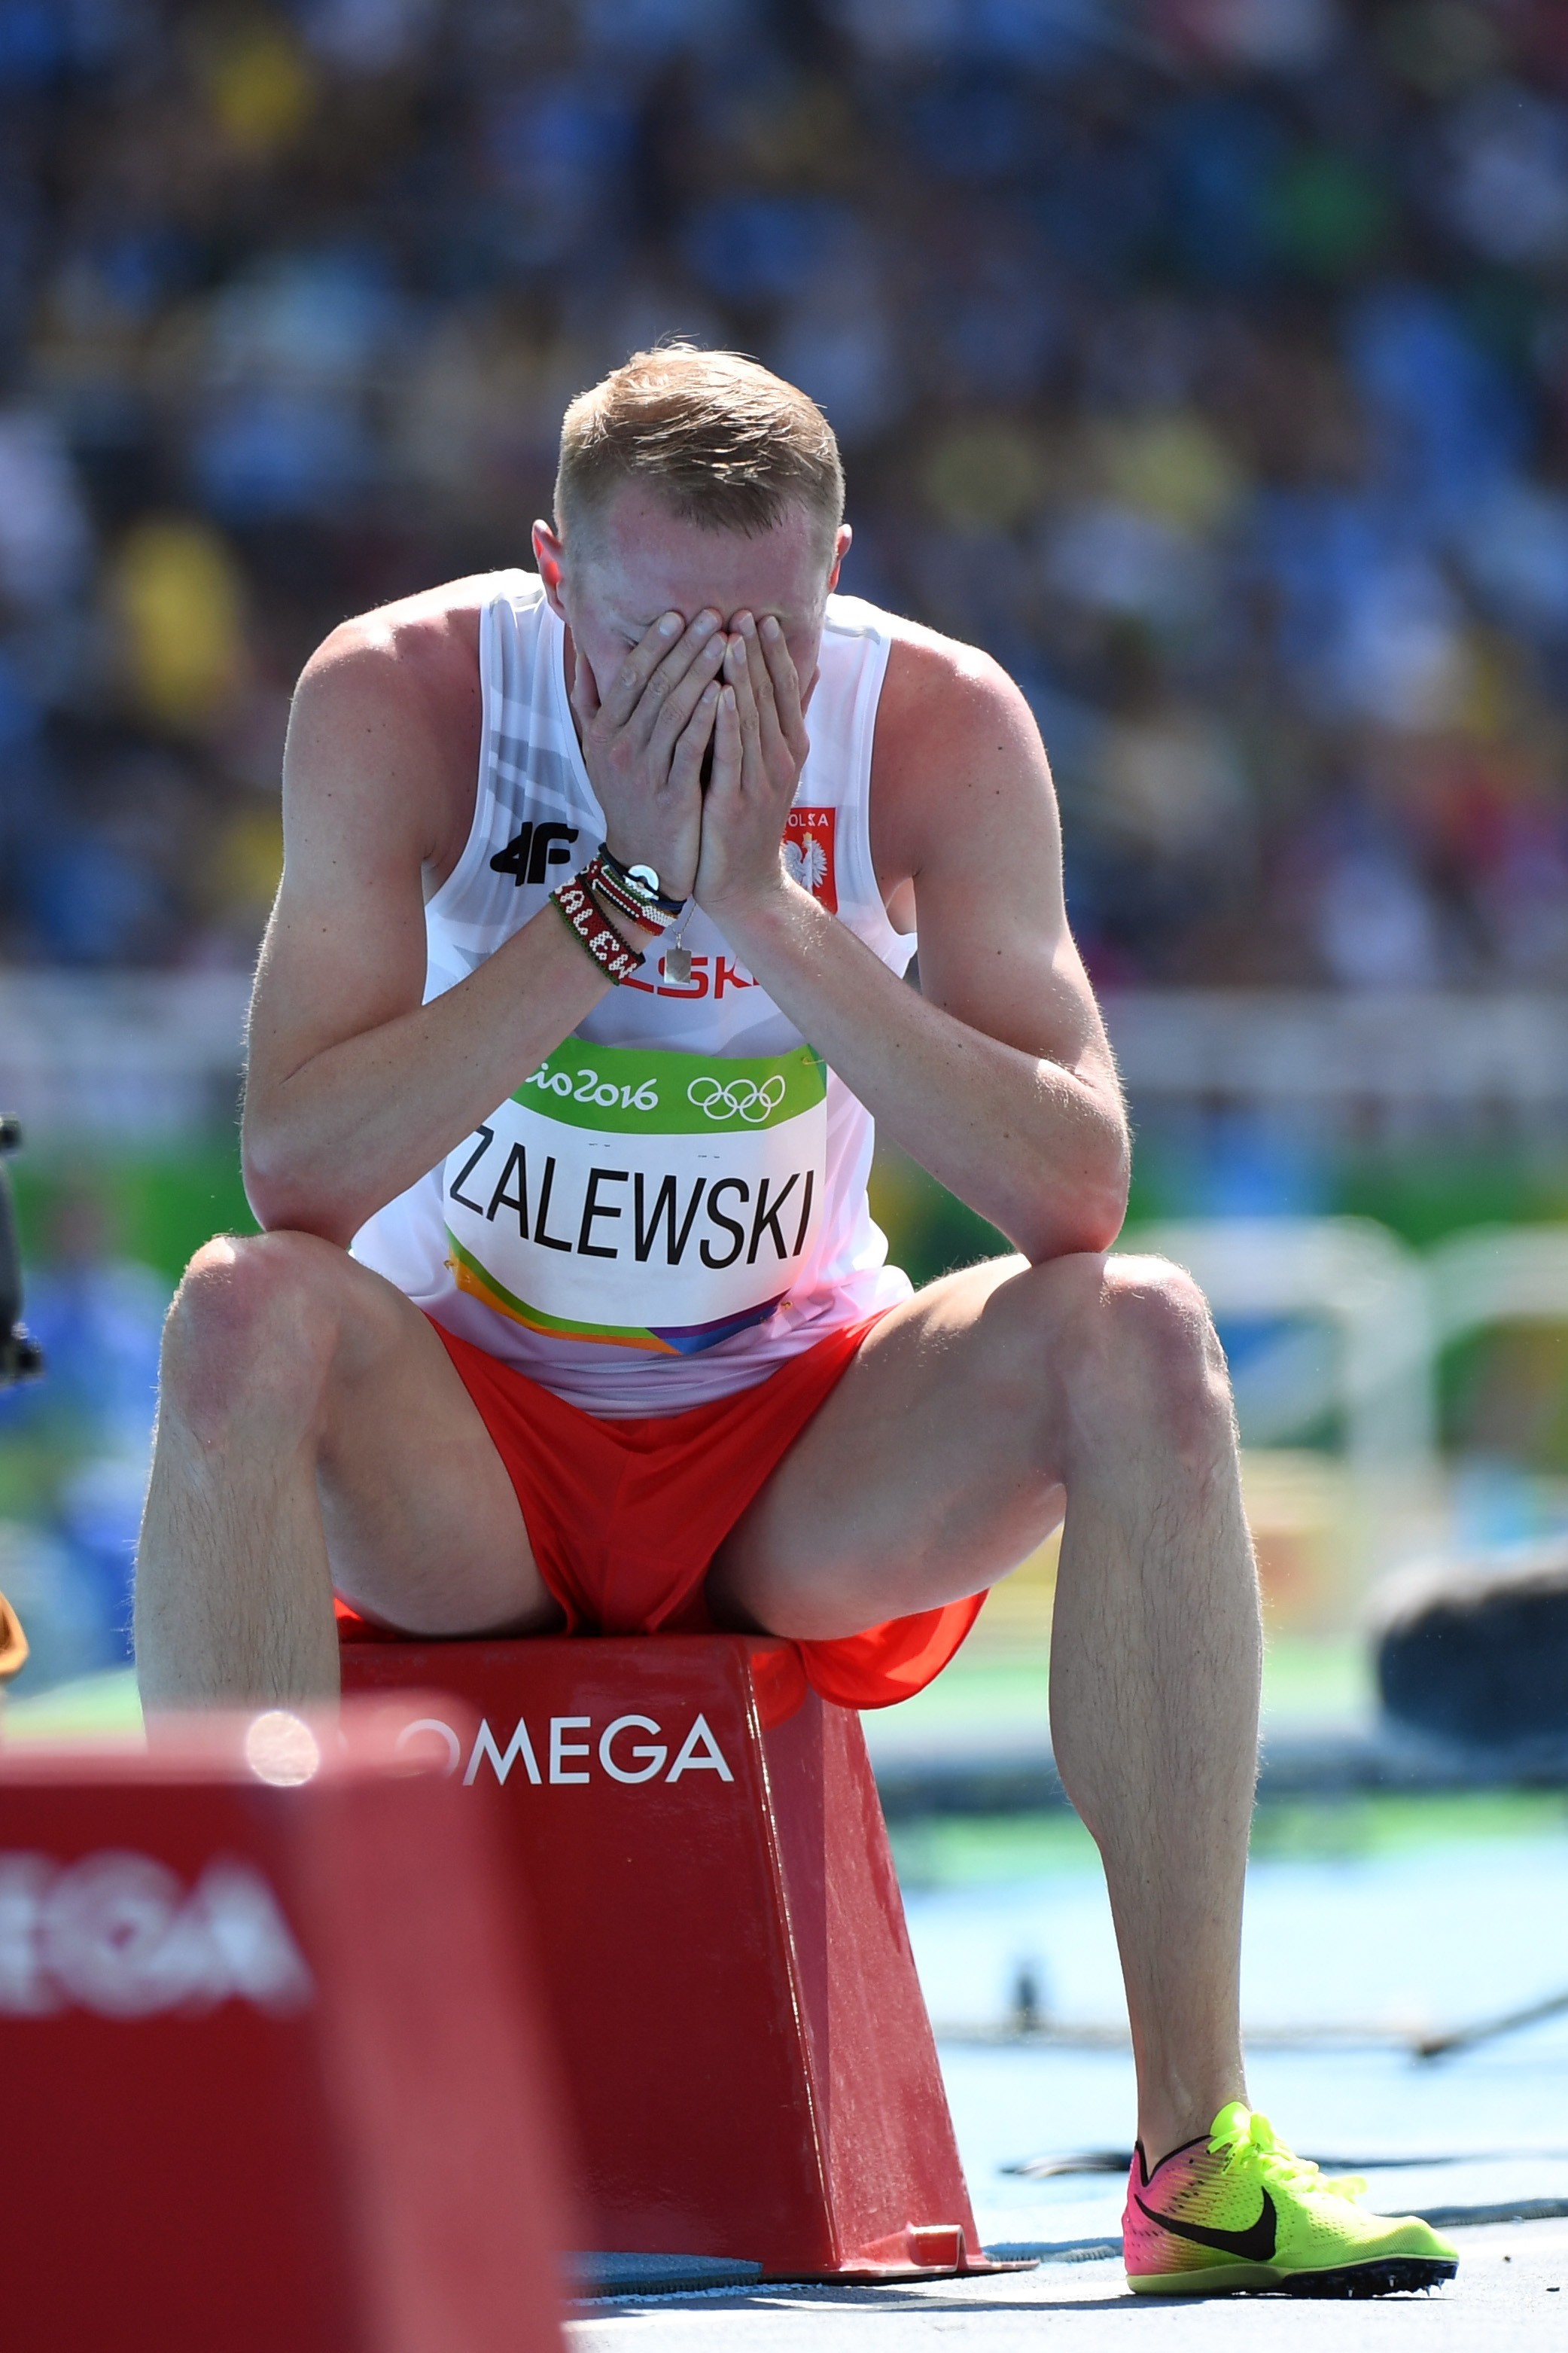 Aug 15, 2016; Rio de Janeiro, Brazil; Krystian Zalewski (POL) reacts after the men's 3000m steeplechase preliminaries in the Rio 2016 Summer Olympic Games at Estadio Olimpico Joao Havelange. Mandatory Credit: James Lang-USA TODAY Sports *** Please Use Credit from Credit Field ***